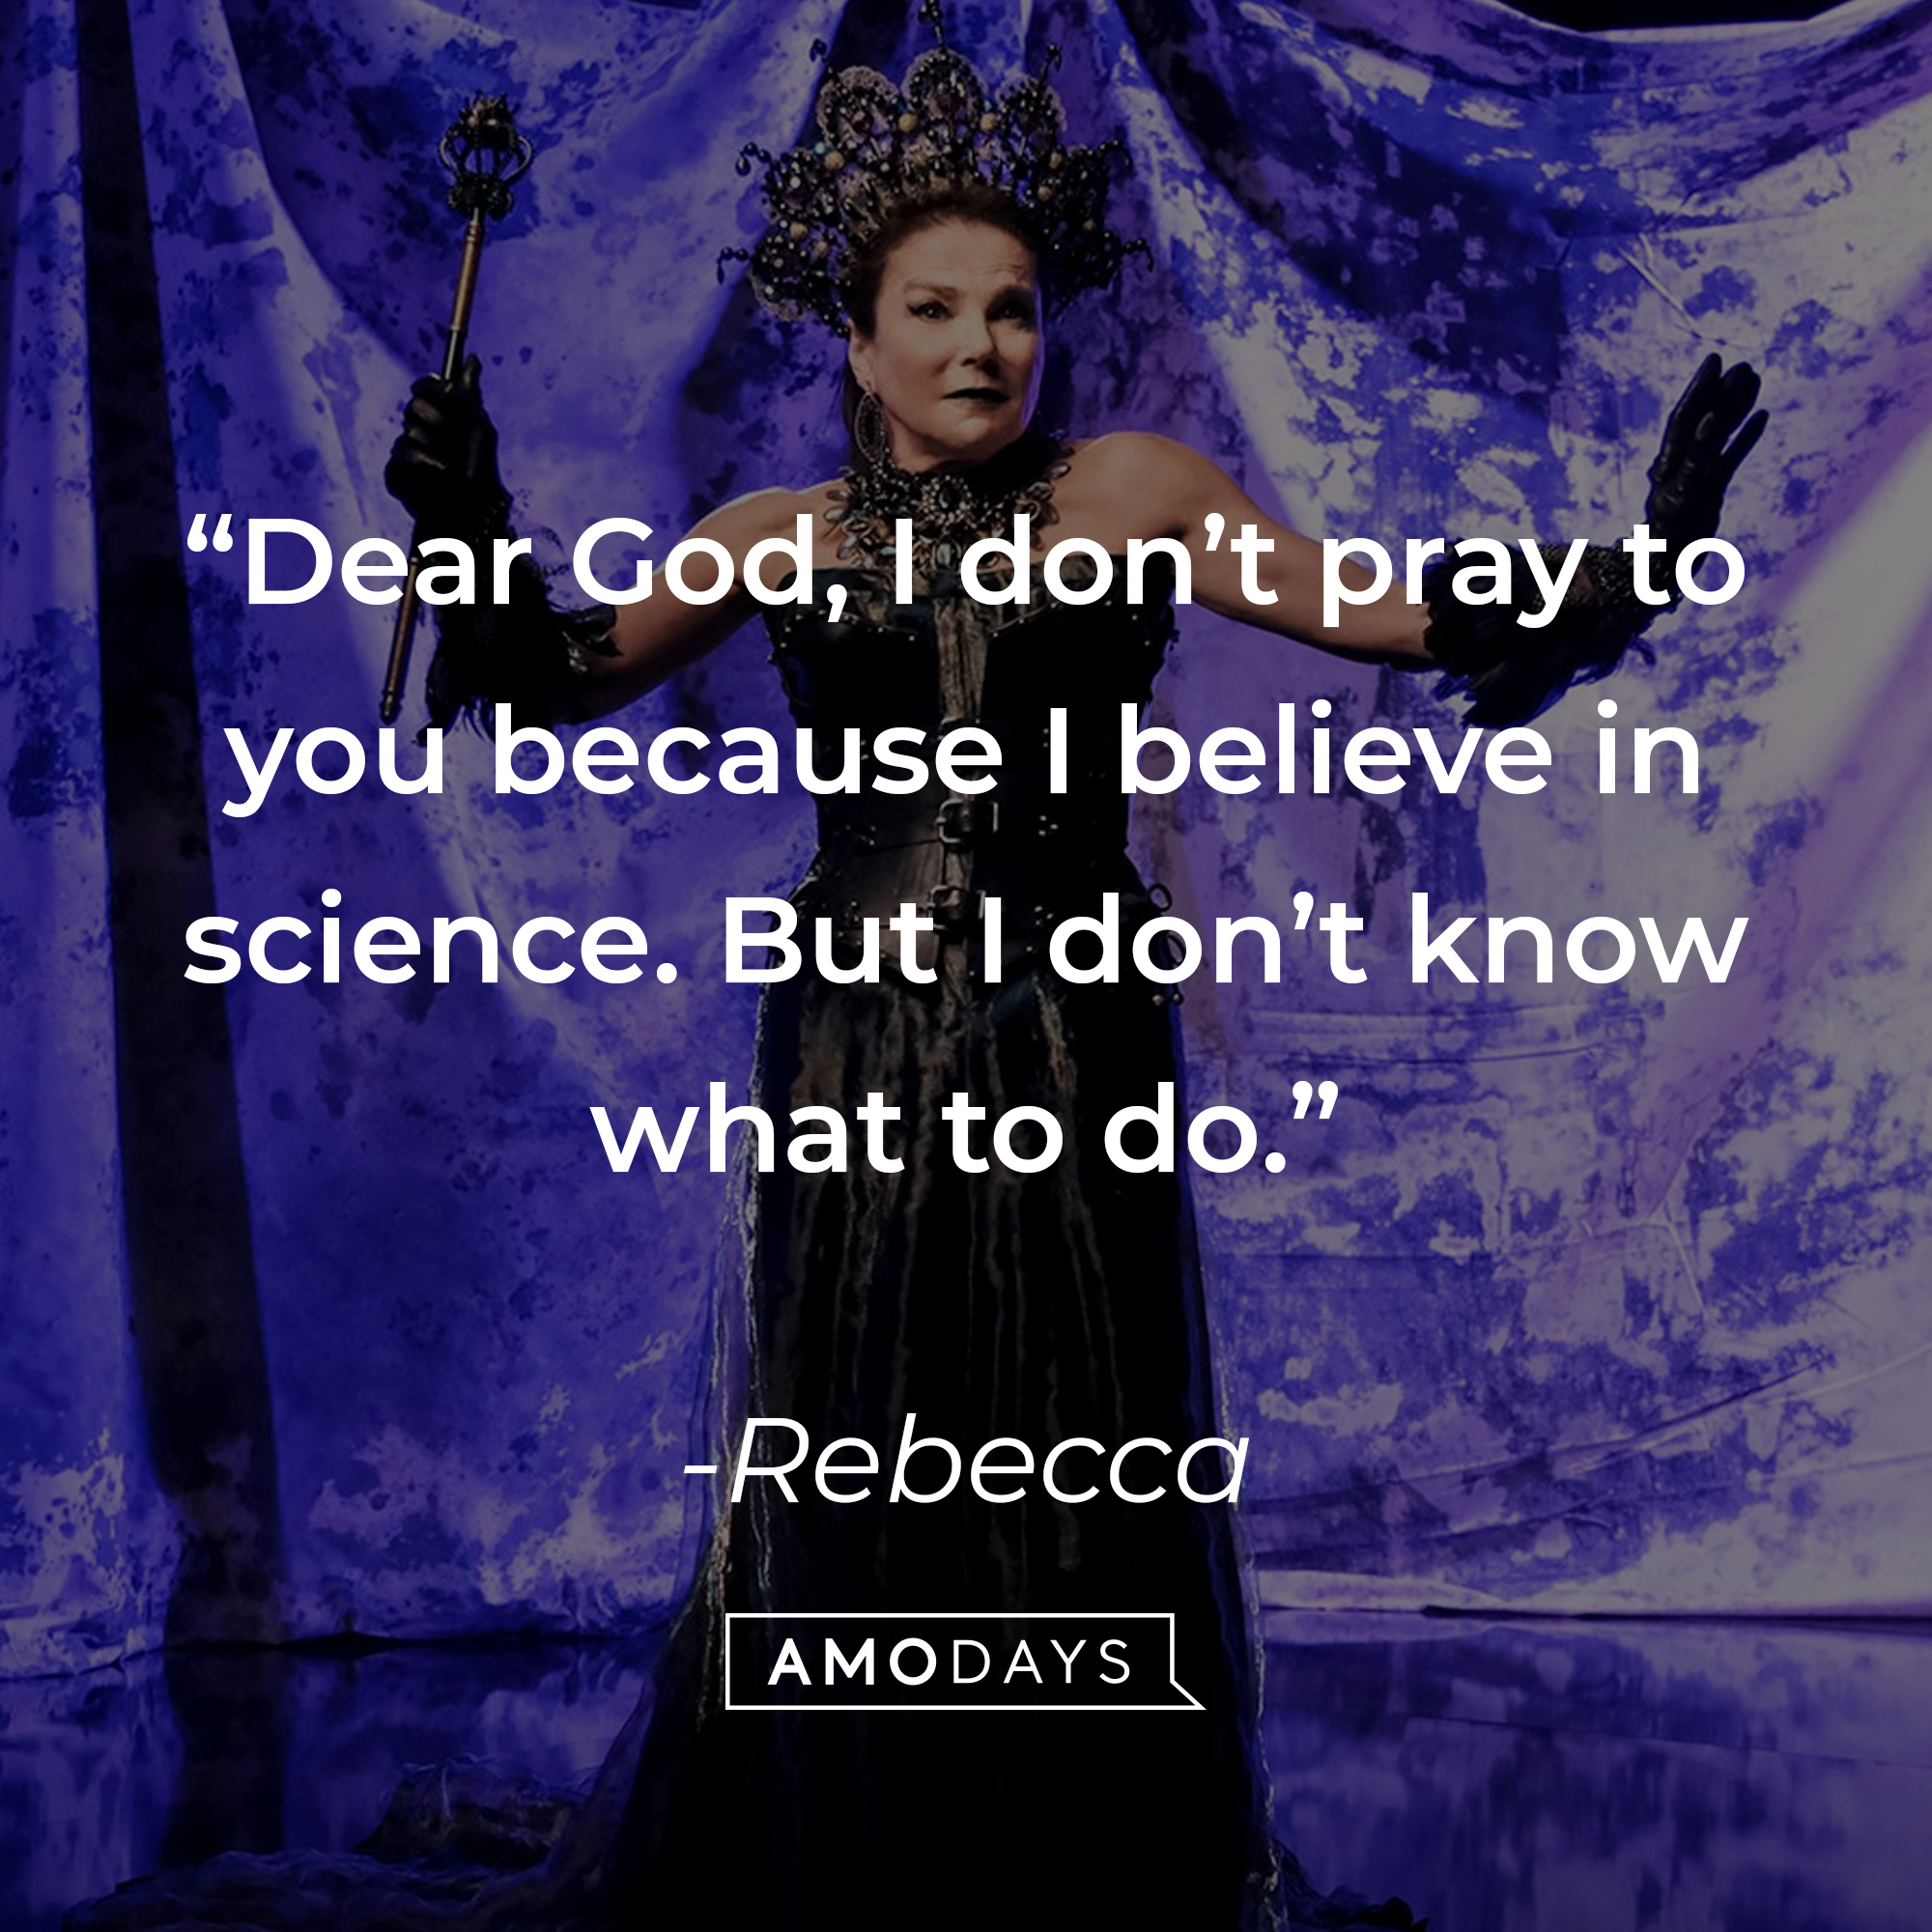 Rebecca’s mother Naomi, with Rebecca’s quote: “Dear God, I don’t pray to you because I believe in science. But I don’t know what to do.” |Source: facebook.com/crazyxgf